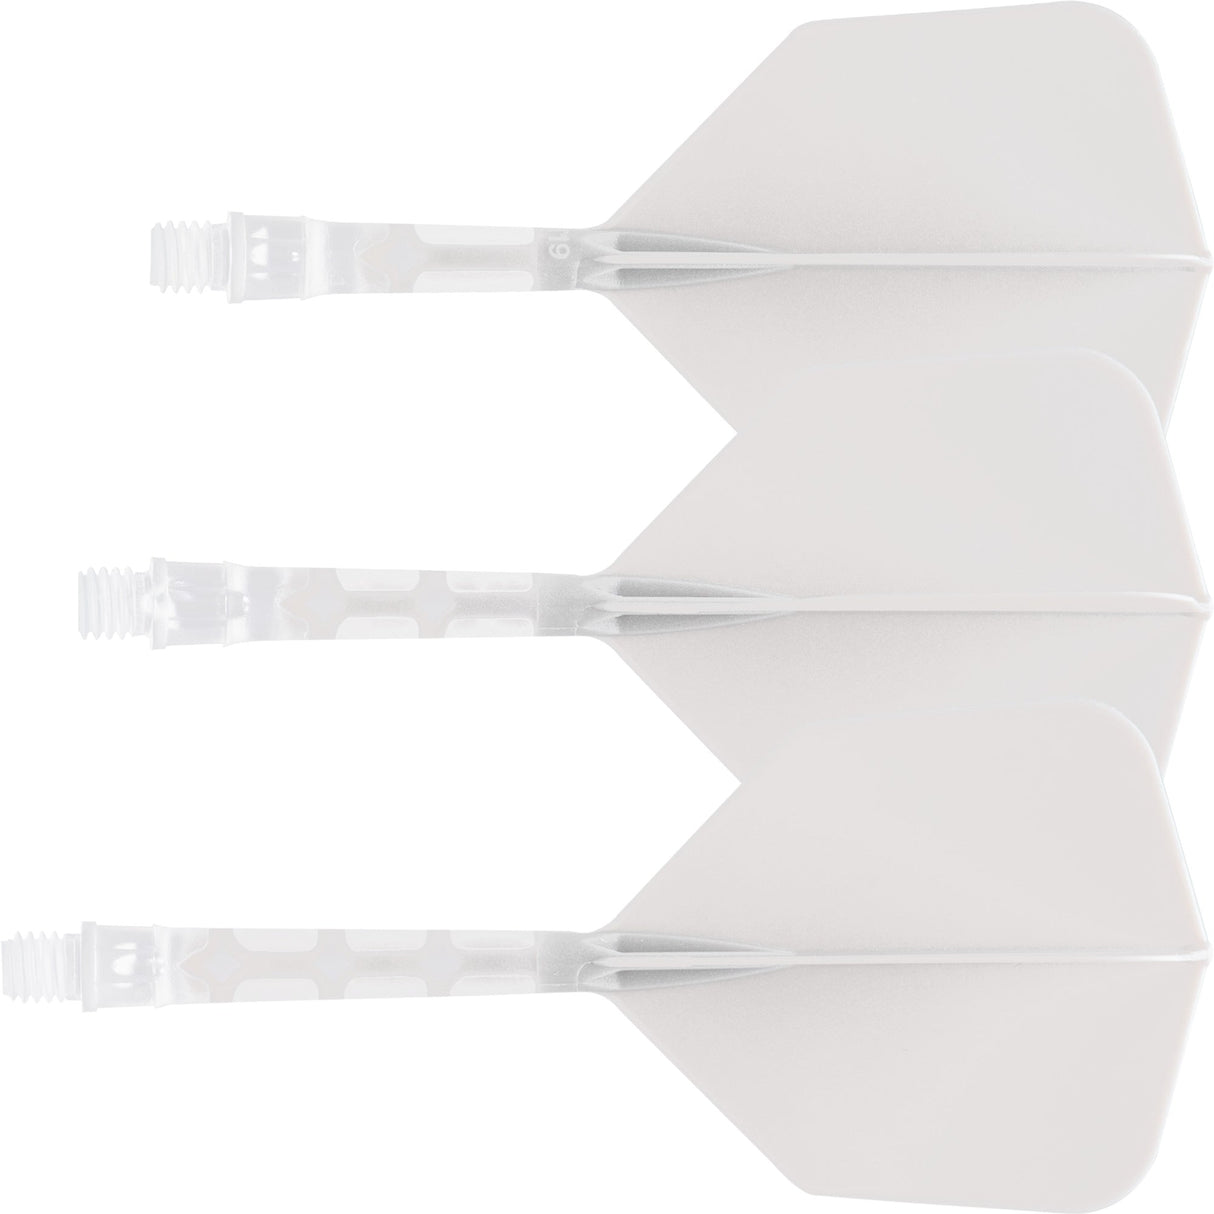 Cuesoul Rost T19 Integrated Dart Shaft and Flights - Big Wing - Clear with White Flight